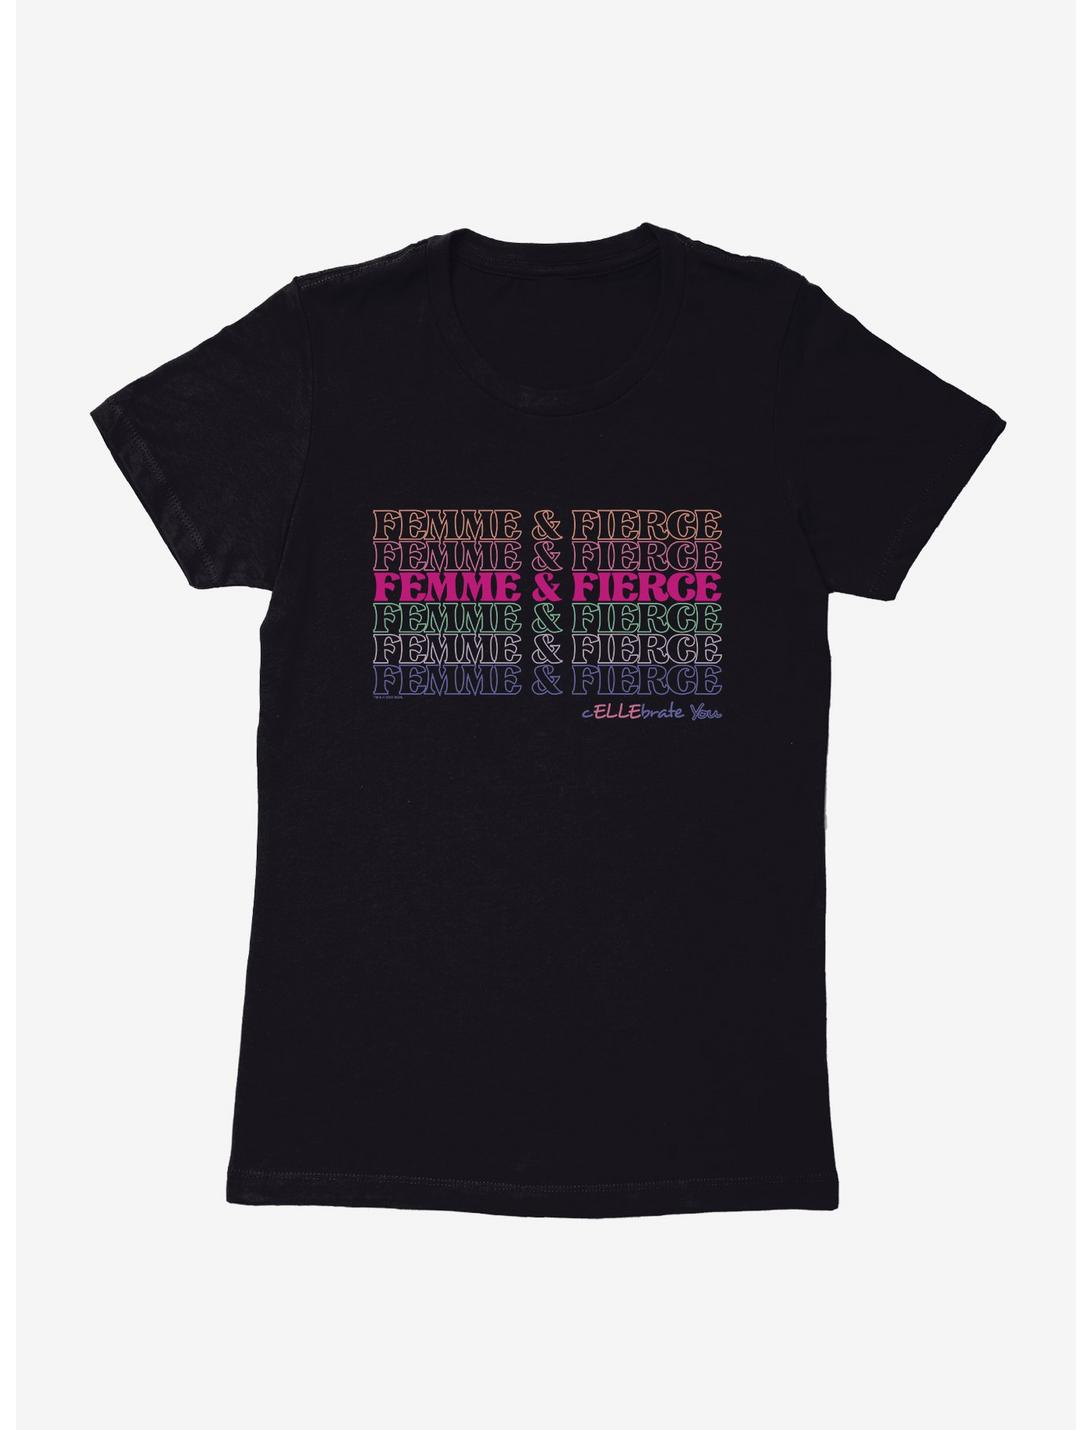 Legally Blonde Femme And Fierce Stack Womens T-Shirt, , hi-res